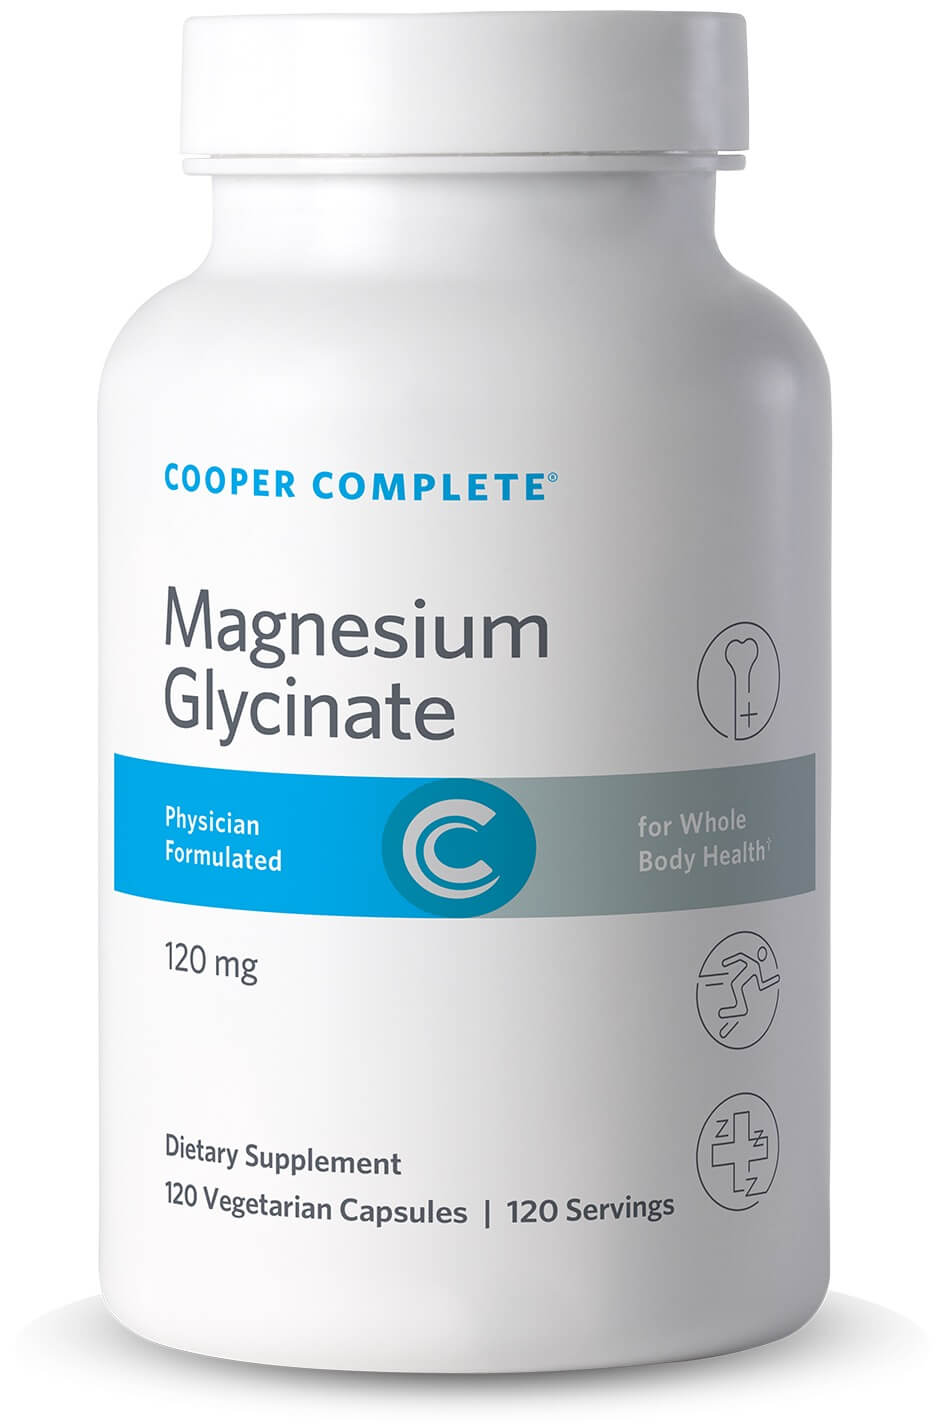 Photo of Cooper Complete 120 mg Magnesium Glycinate Supplement bottle.